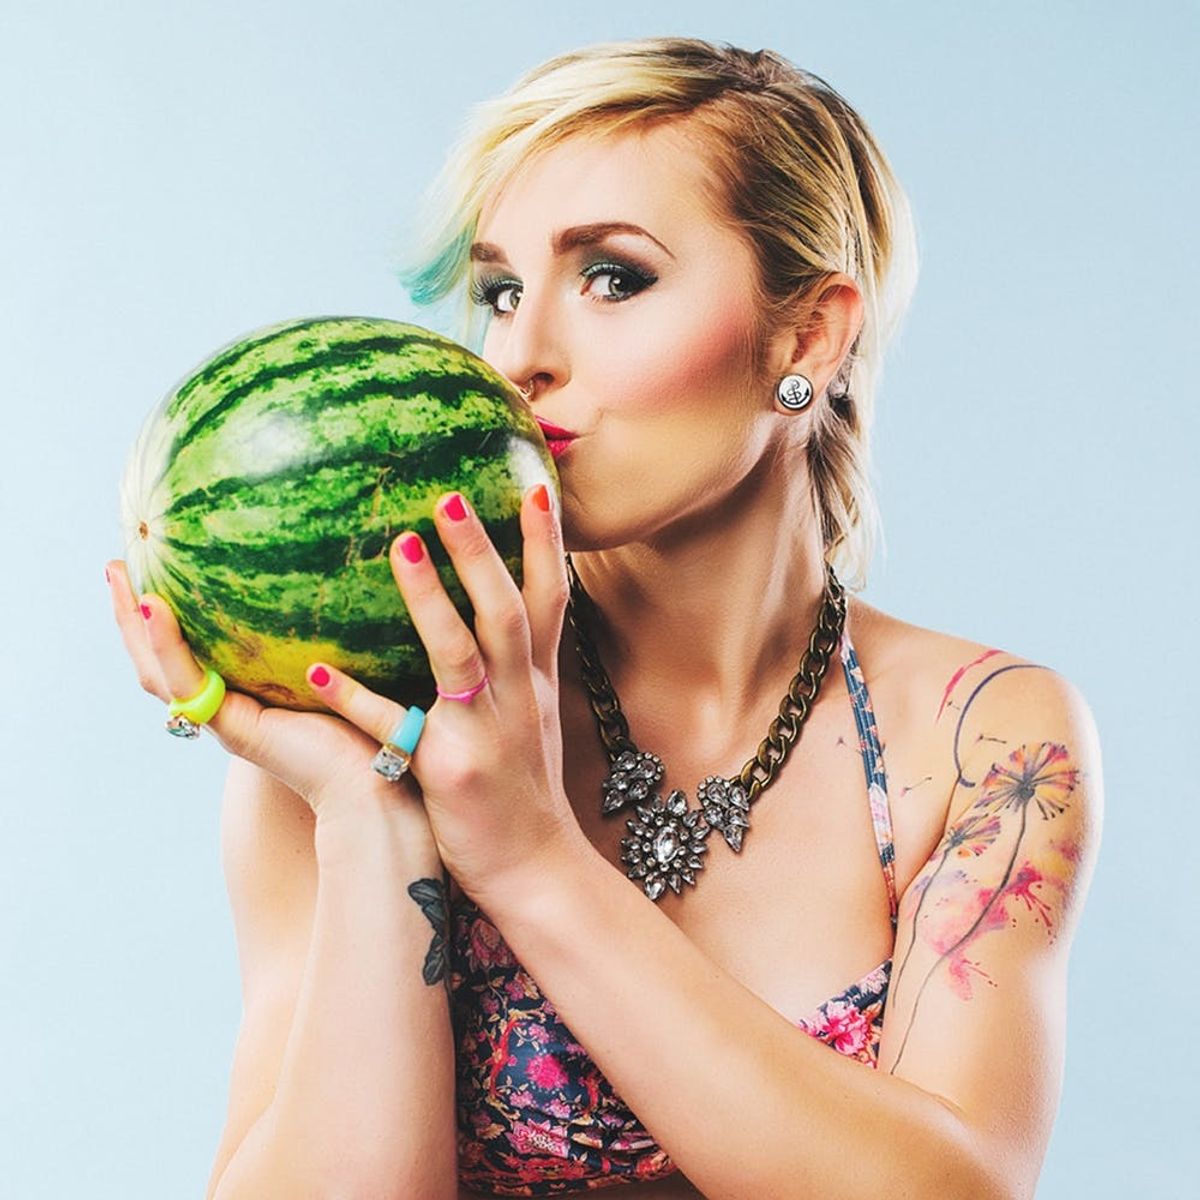 WTF: You Can Get Tattoos or Entire Outfits at Future Whole Foods